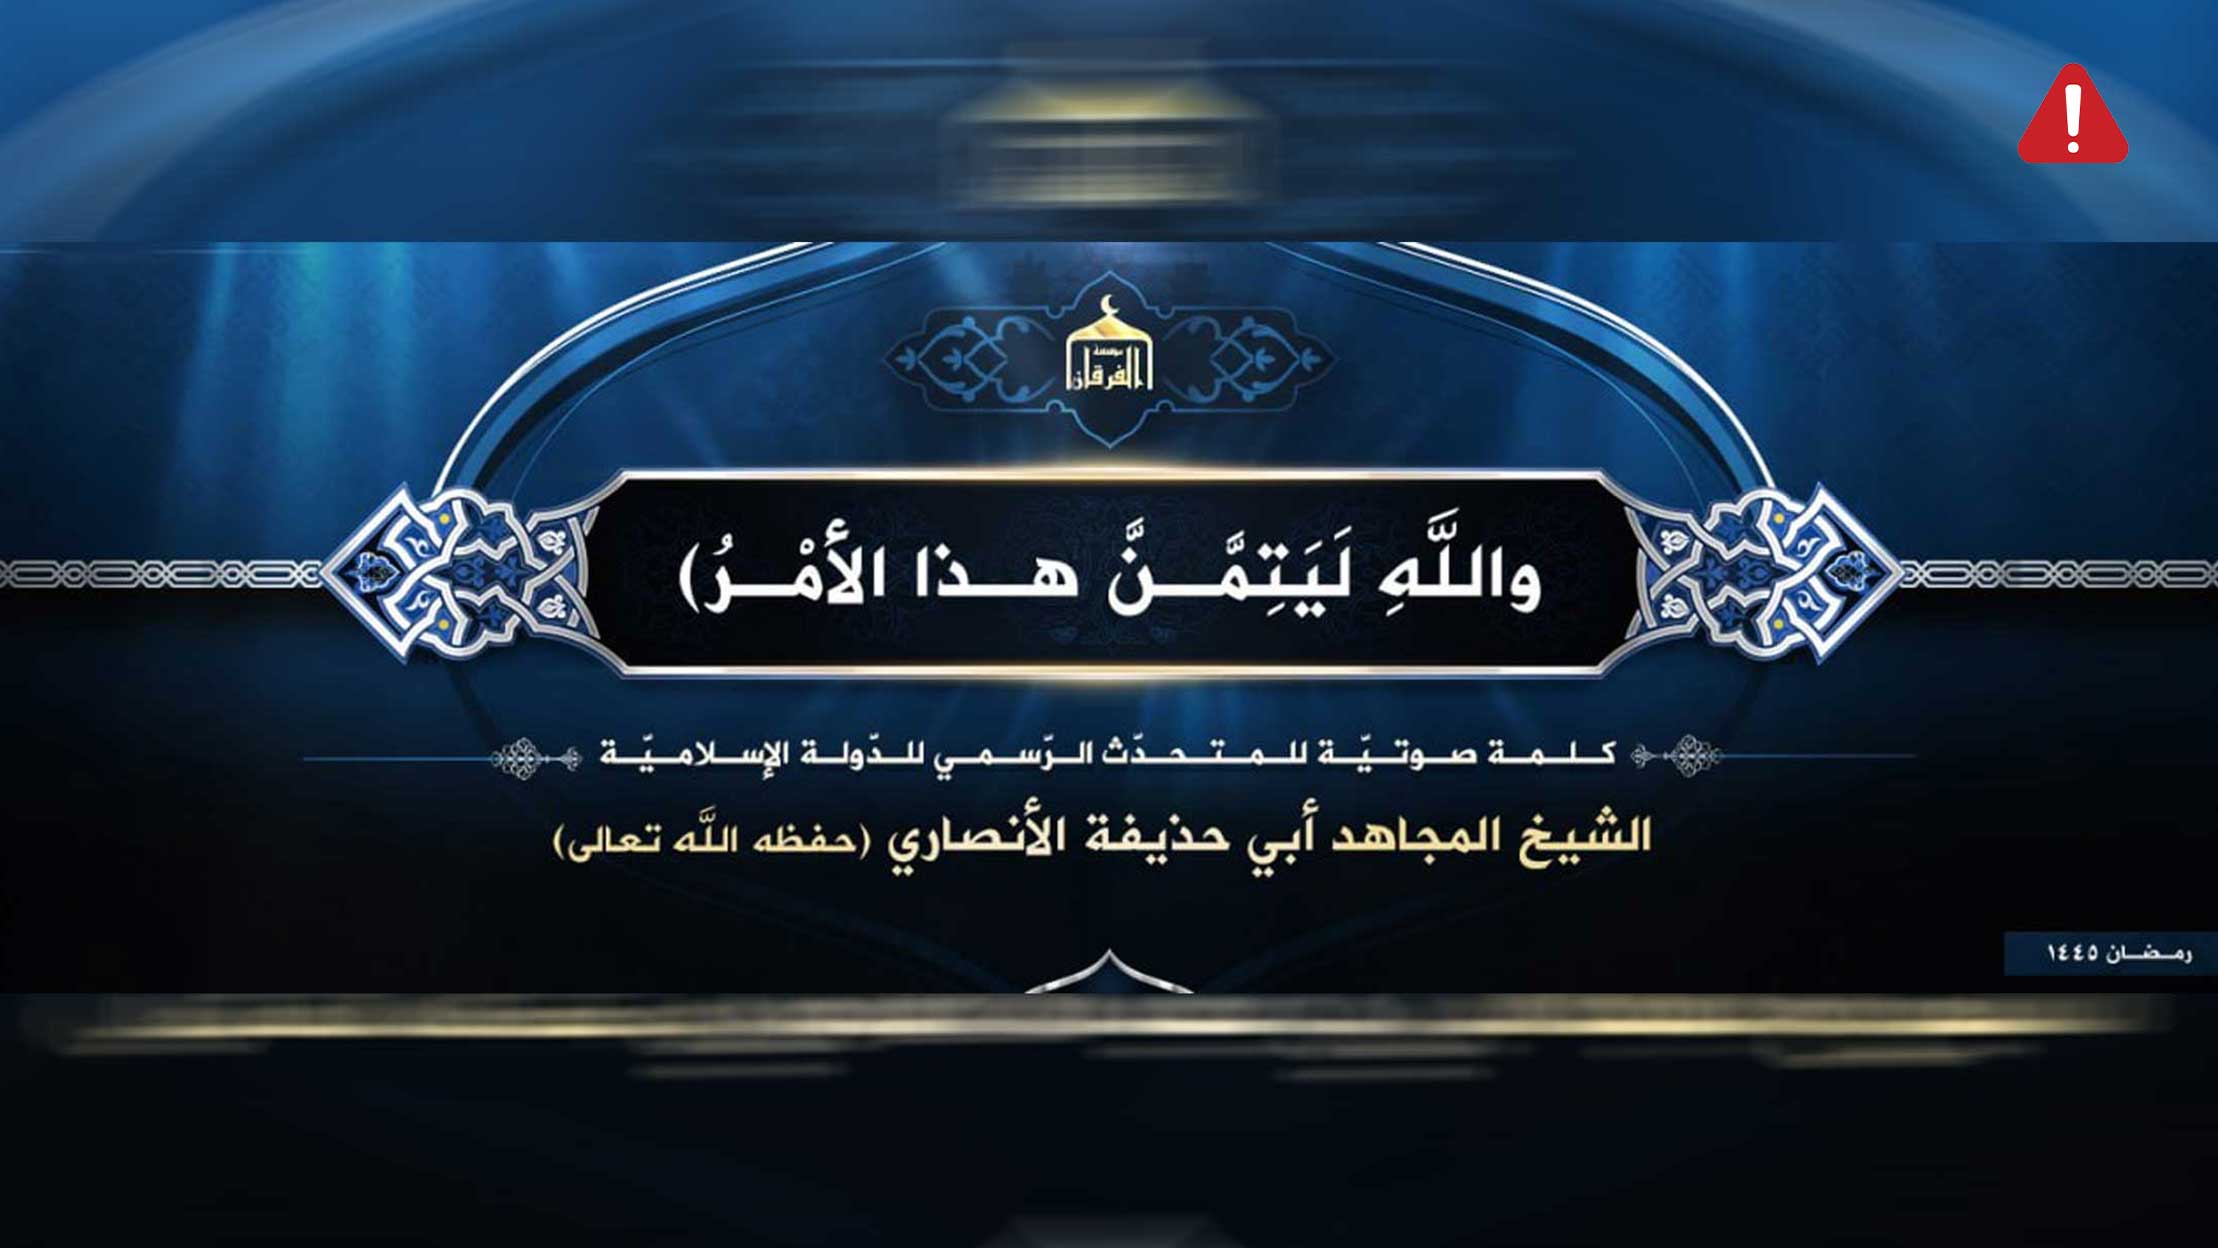 TKD MONITORING: Islamic State Central Publishes Speech from Spokesmam